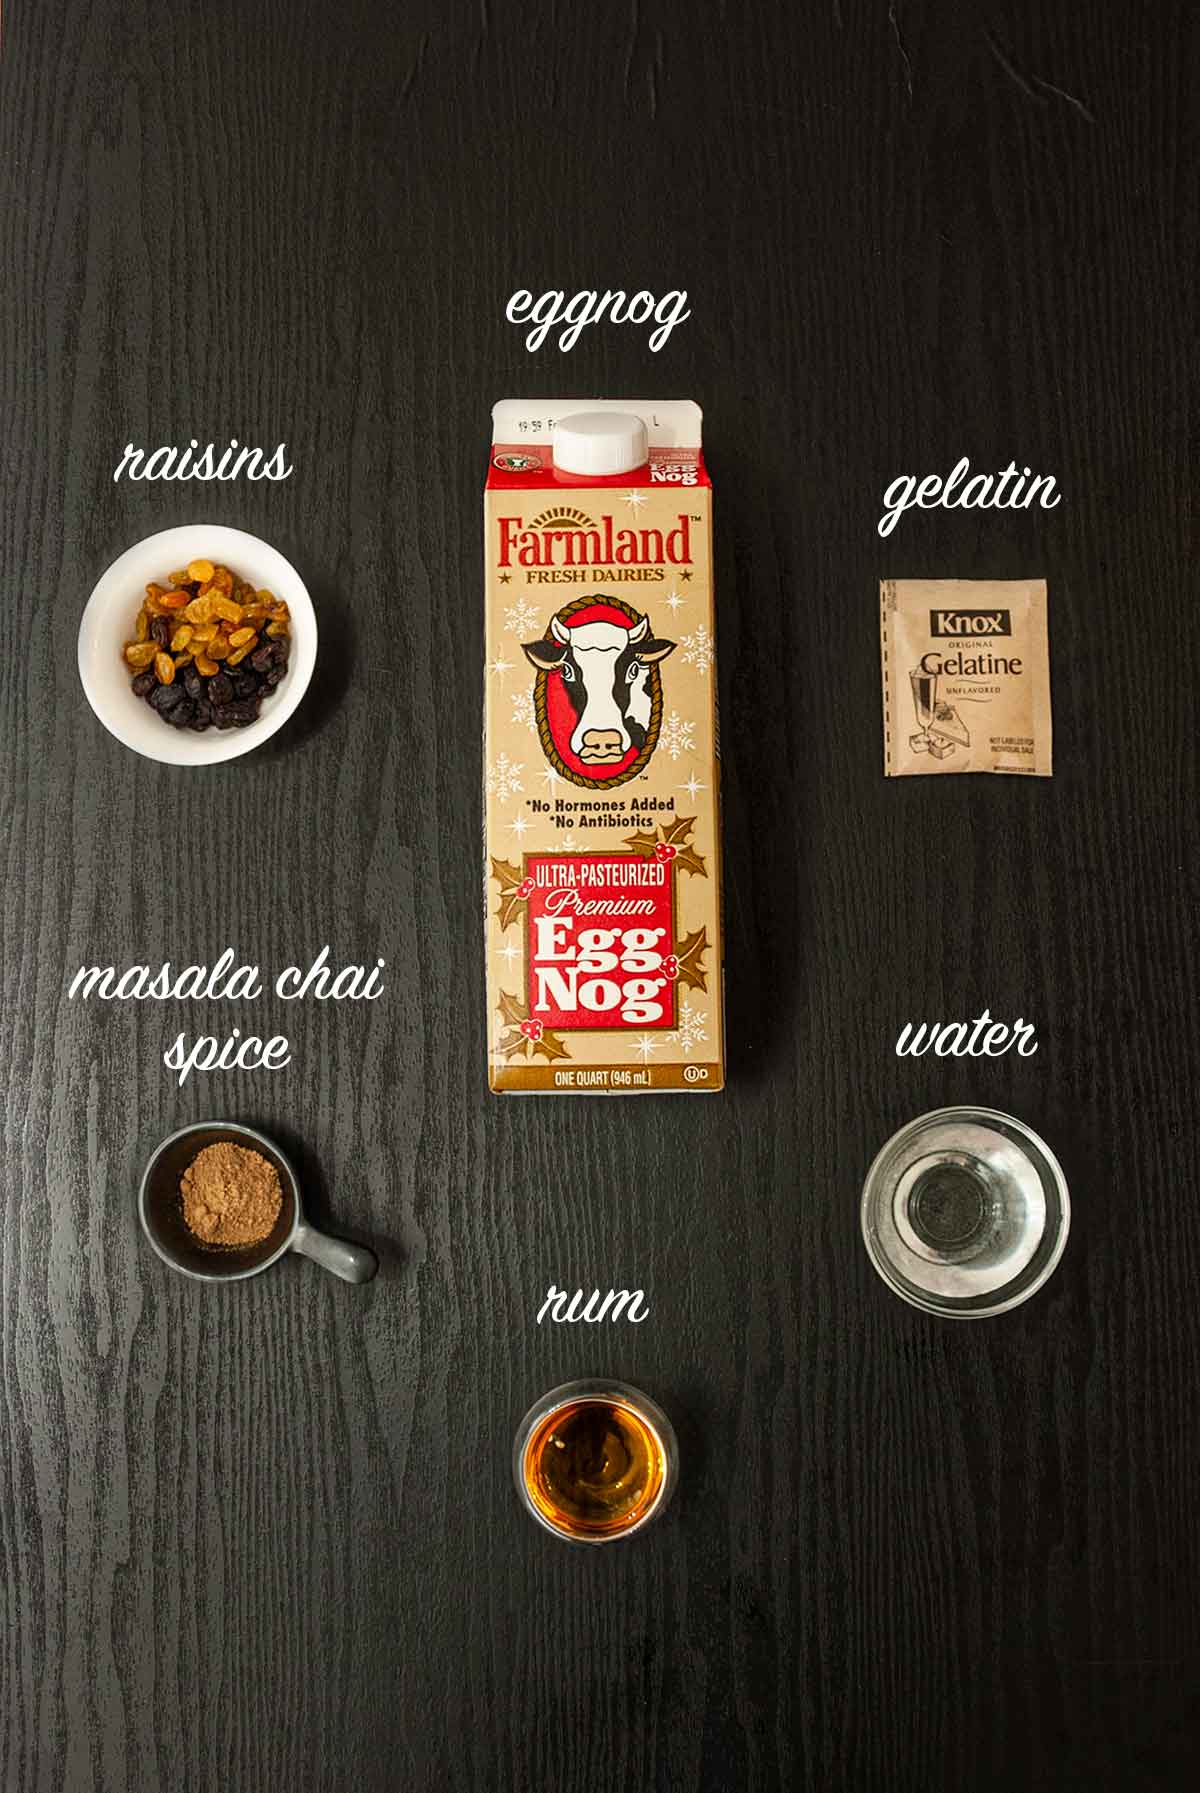 6 ingredients on a table for making eggnog panna cotta with labels.